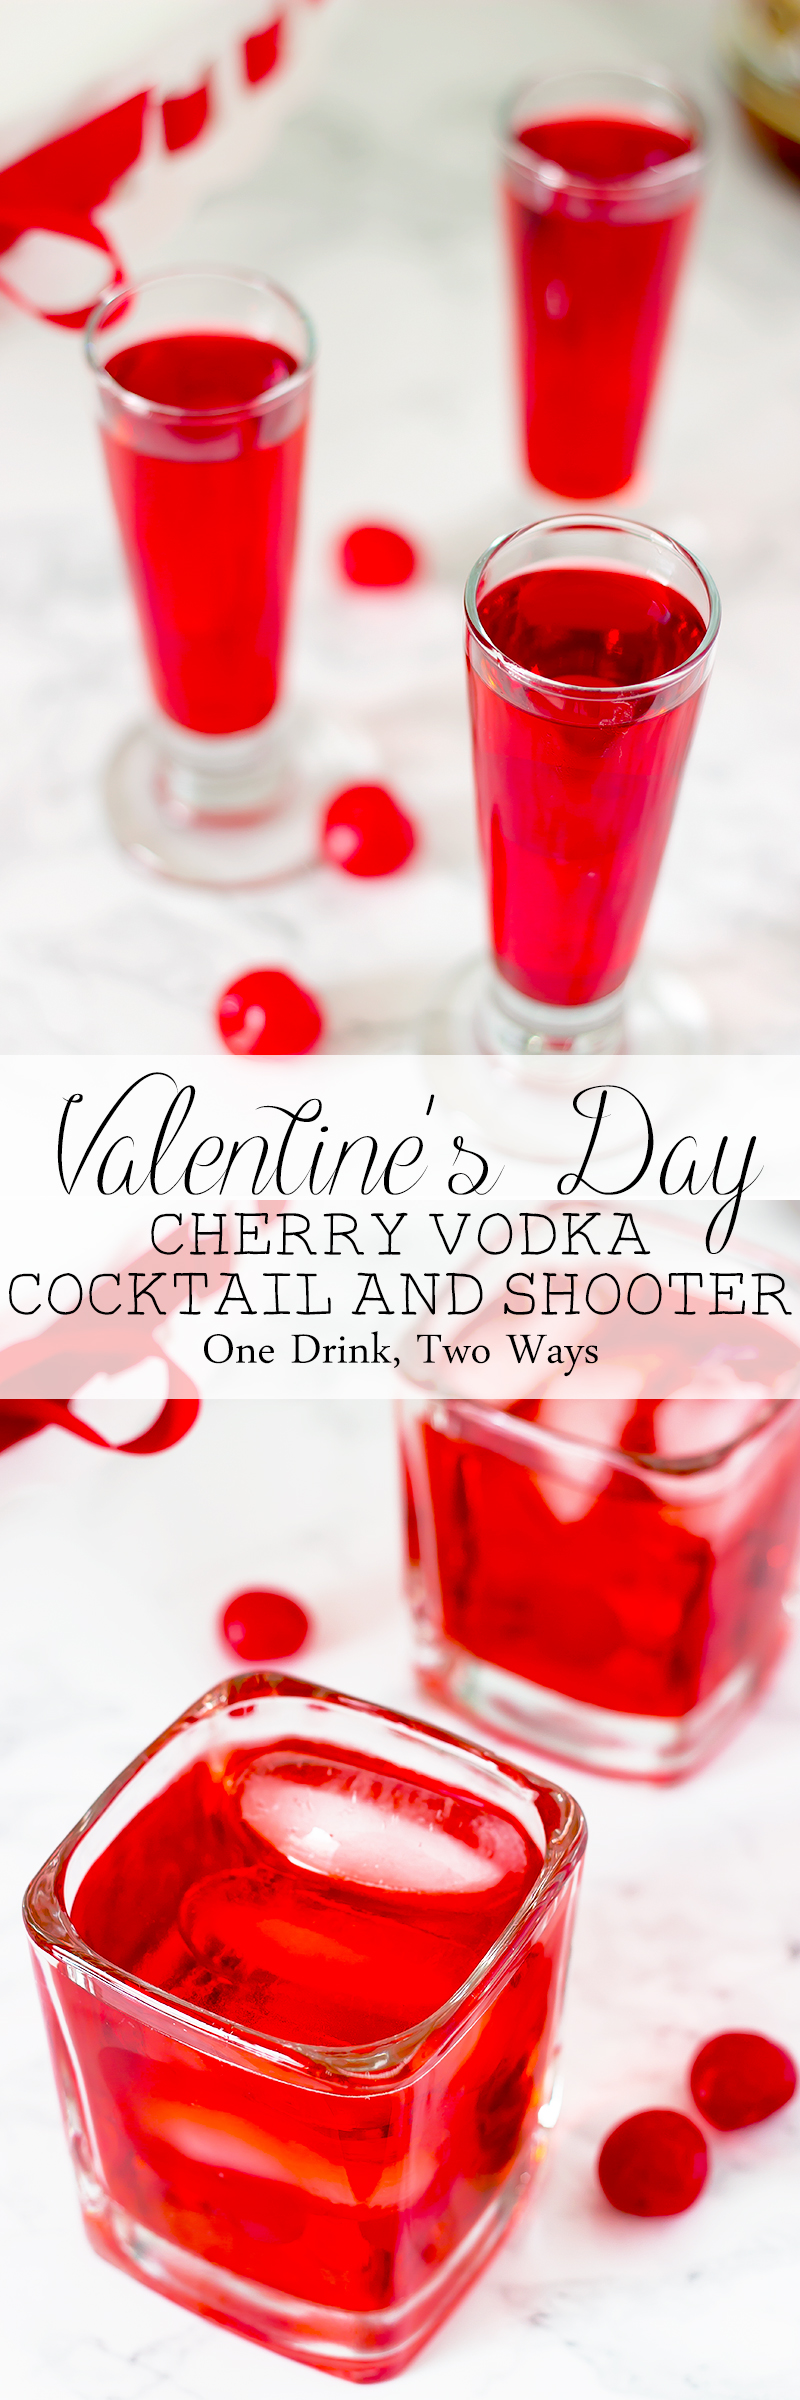 Valentine's Day Cocktail and Shooter --- This Cherry Vodka Cocktail & Shooter is the perfect drink combo for a red Valentine's Day.